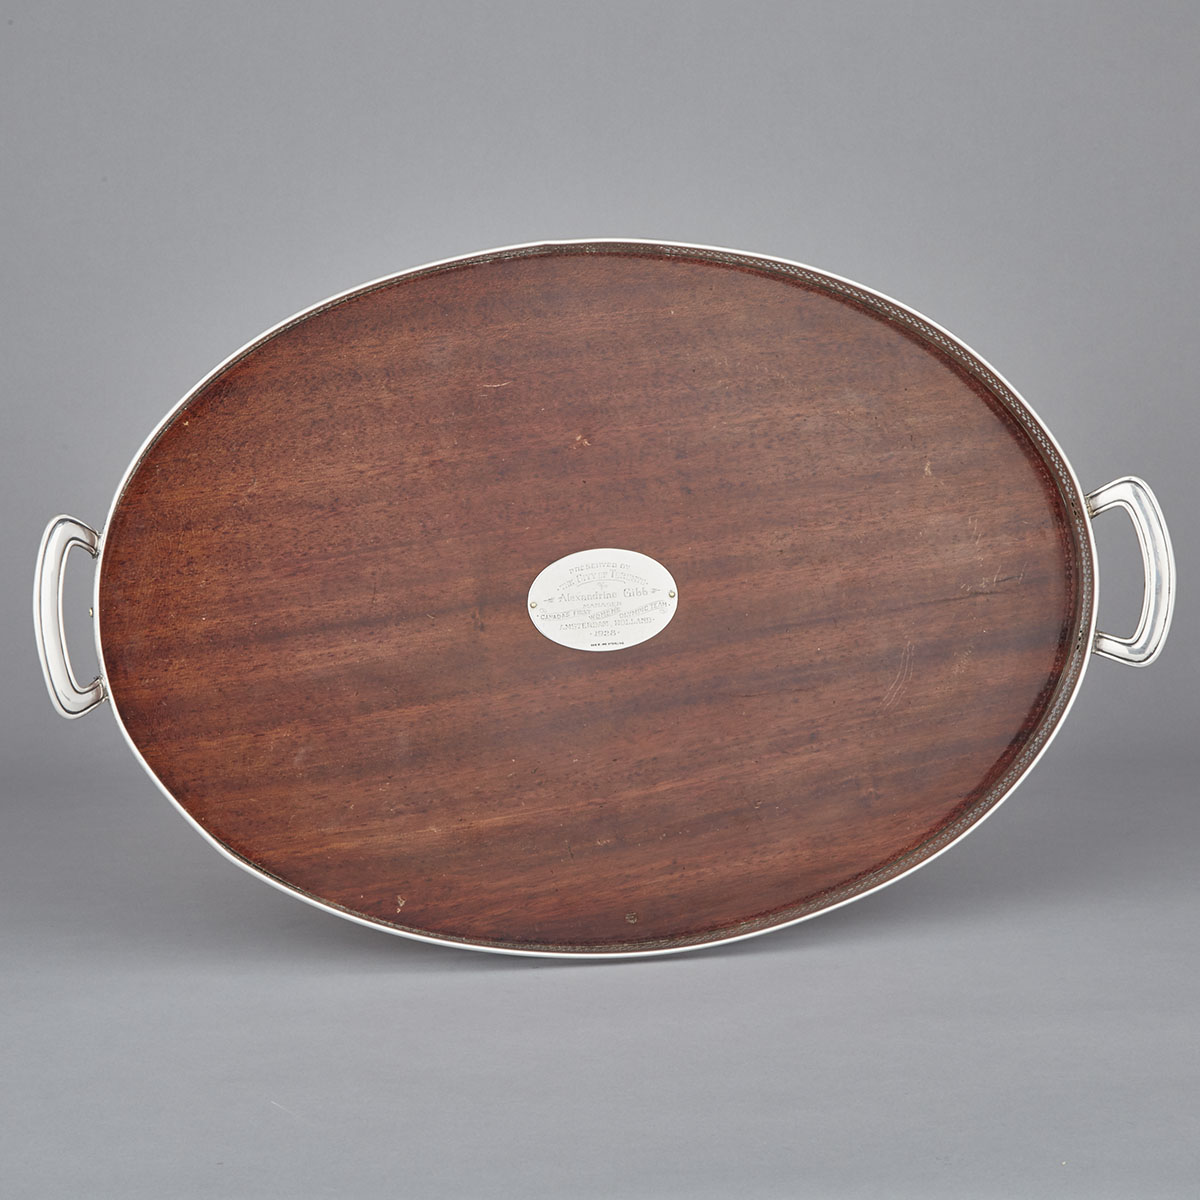 Canadian Silver Mounted Mahogany Oval Serving Tray, Roden Bros., Toronto, Ont., c.1928